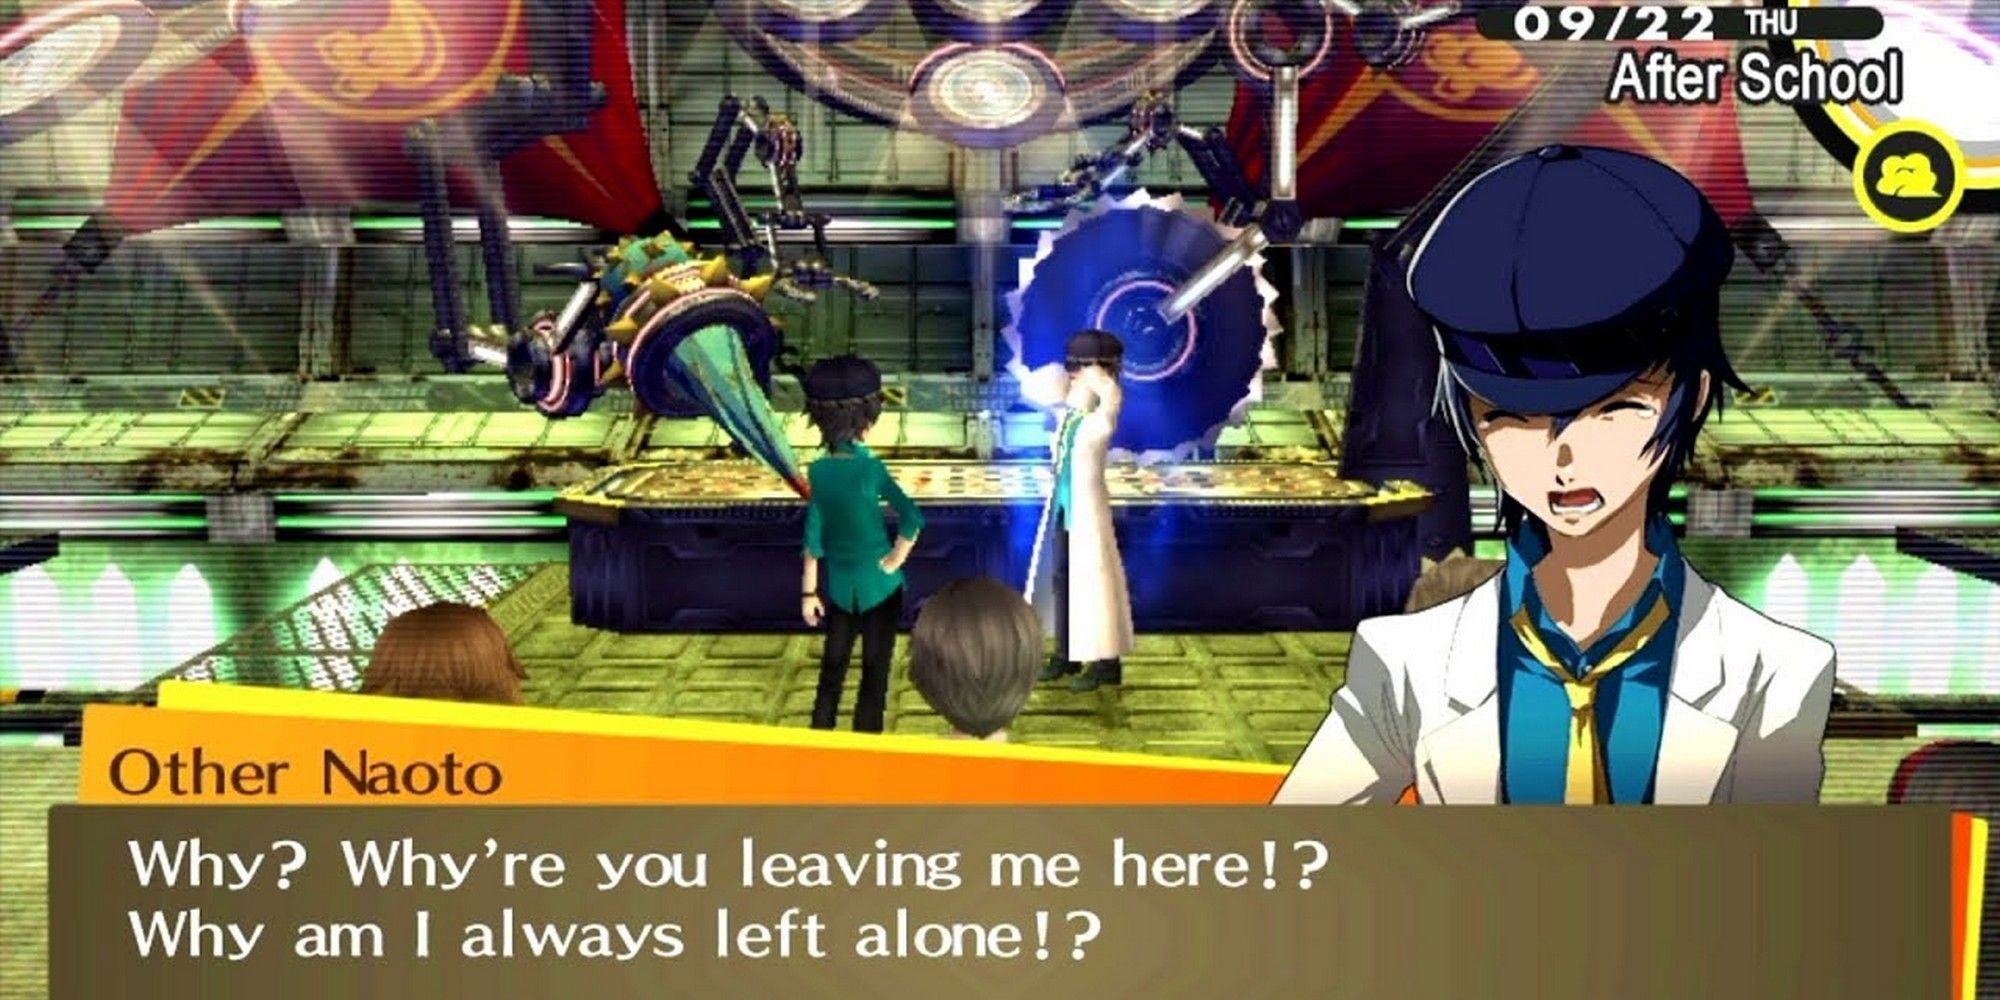 Persona-4-Naotos-Secret-Lab-Naoto-Shirogane-Police-Dungeon-Palace-Other-1